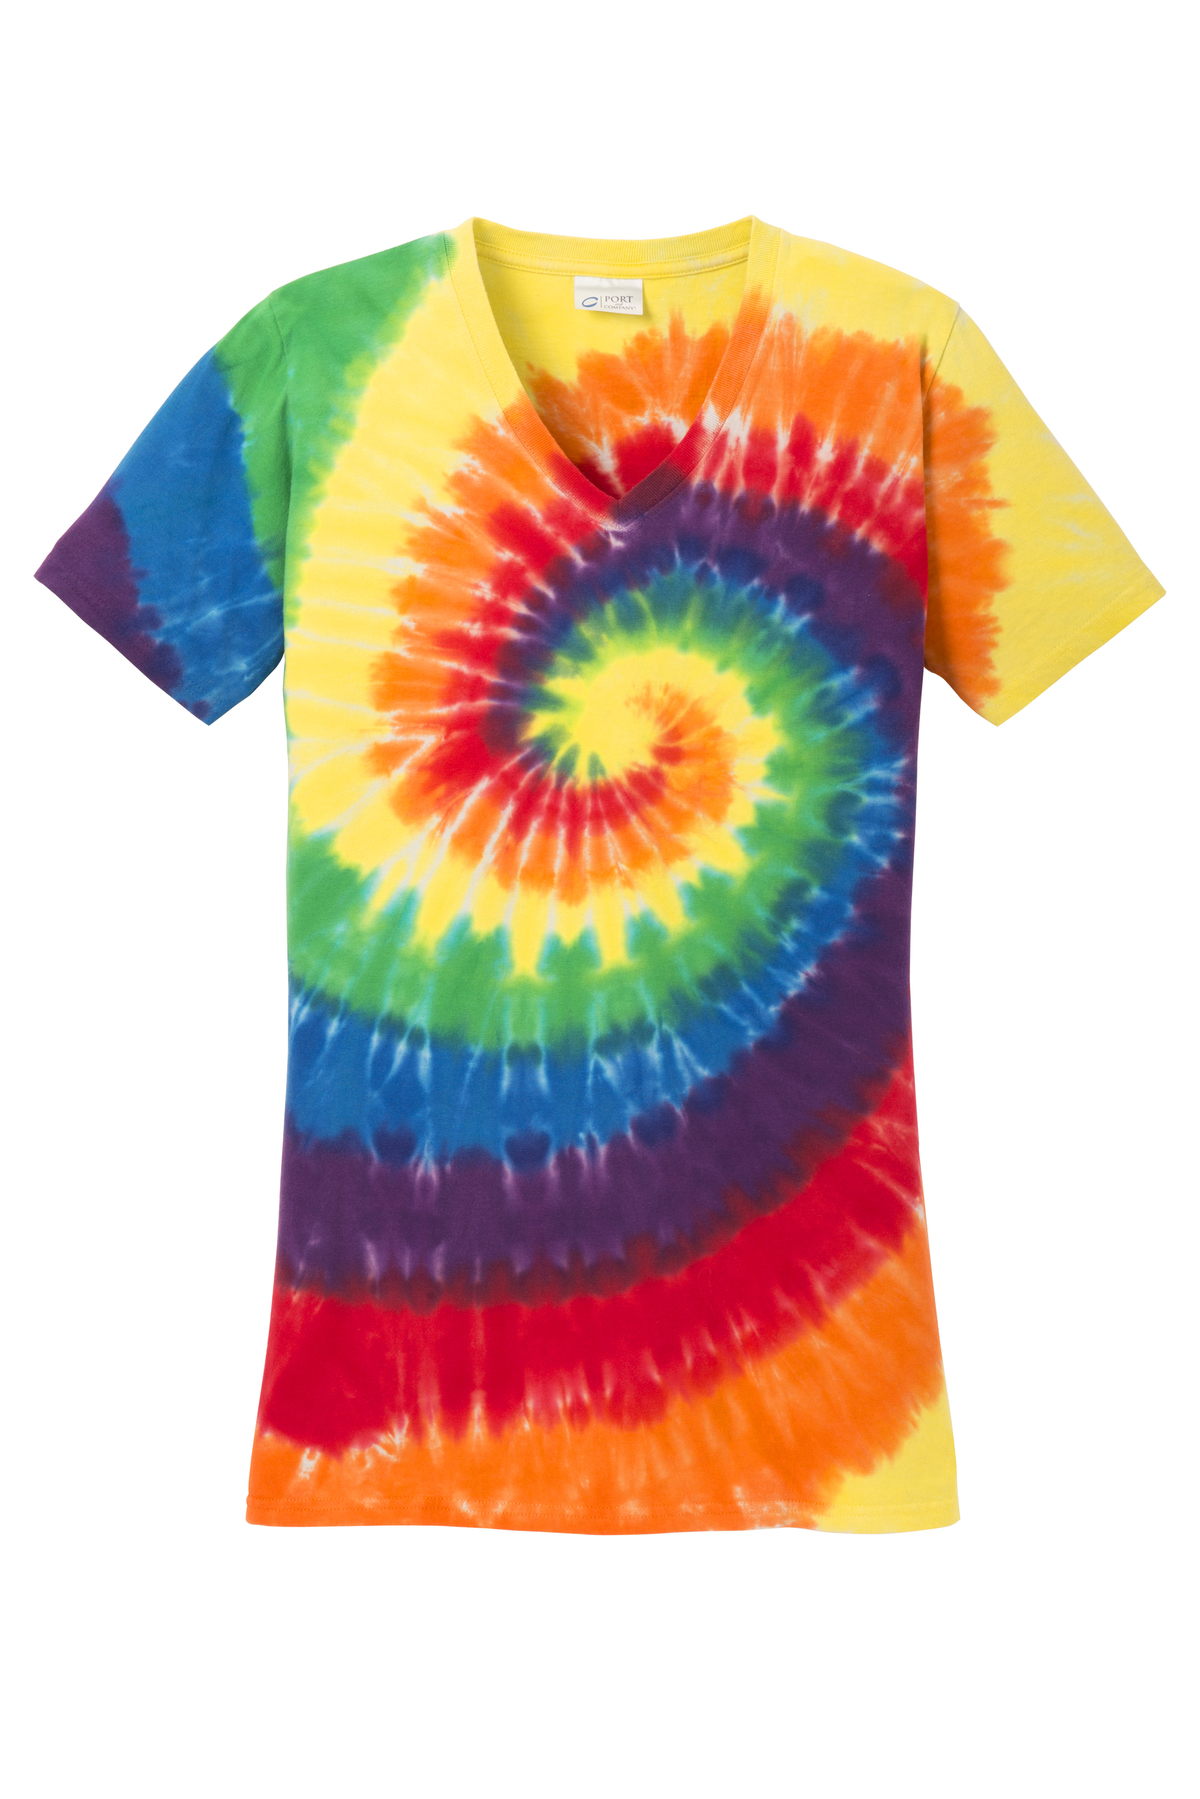 Reverse Tie Dye Rainbow Hollow Out V Neck Short Sleeve Tee Shirt for Women  Summer Basic Tops Keyhole Neck Tshirts Blouse(Black Rock Tennessee,S) at   Women's Clothing store